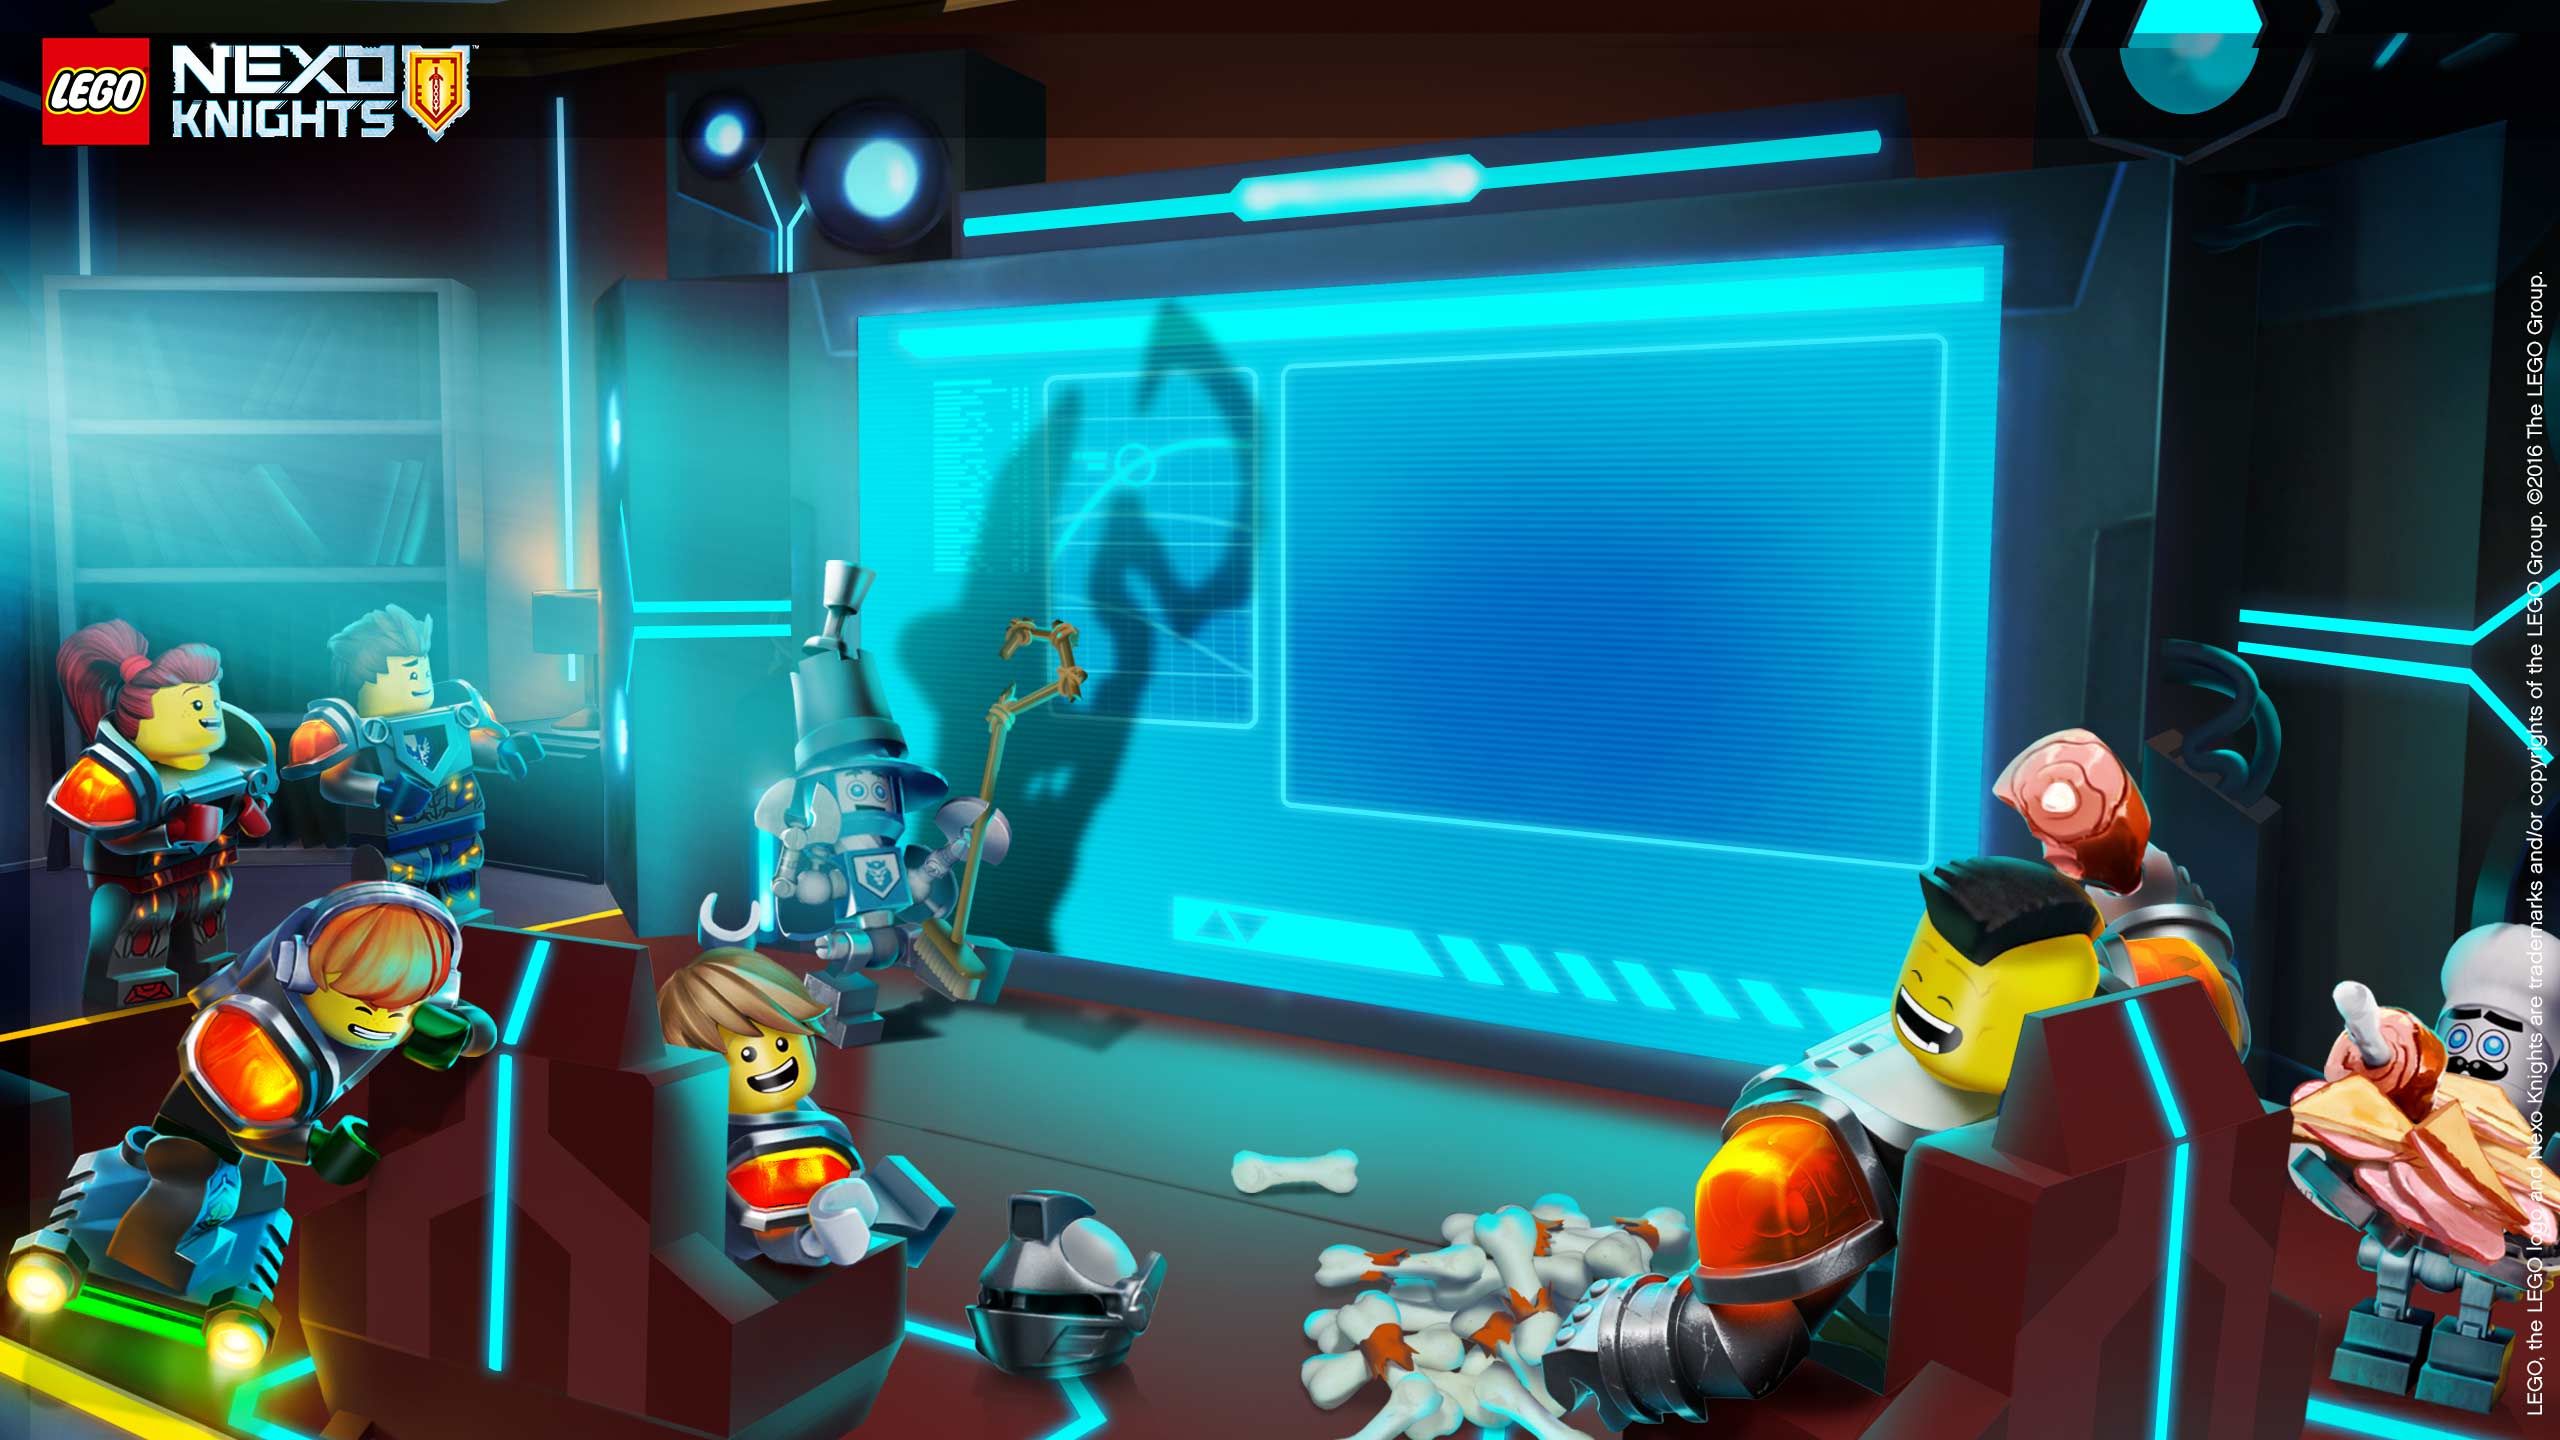 Entertainment Room, Room Wallpaper, Knights, Lego, - Pc Game , HD Wallpaper & Backgrounds